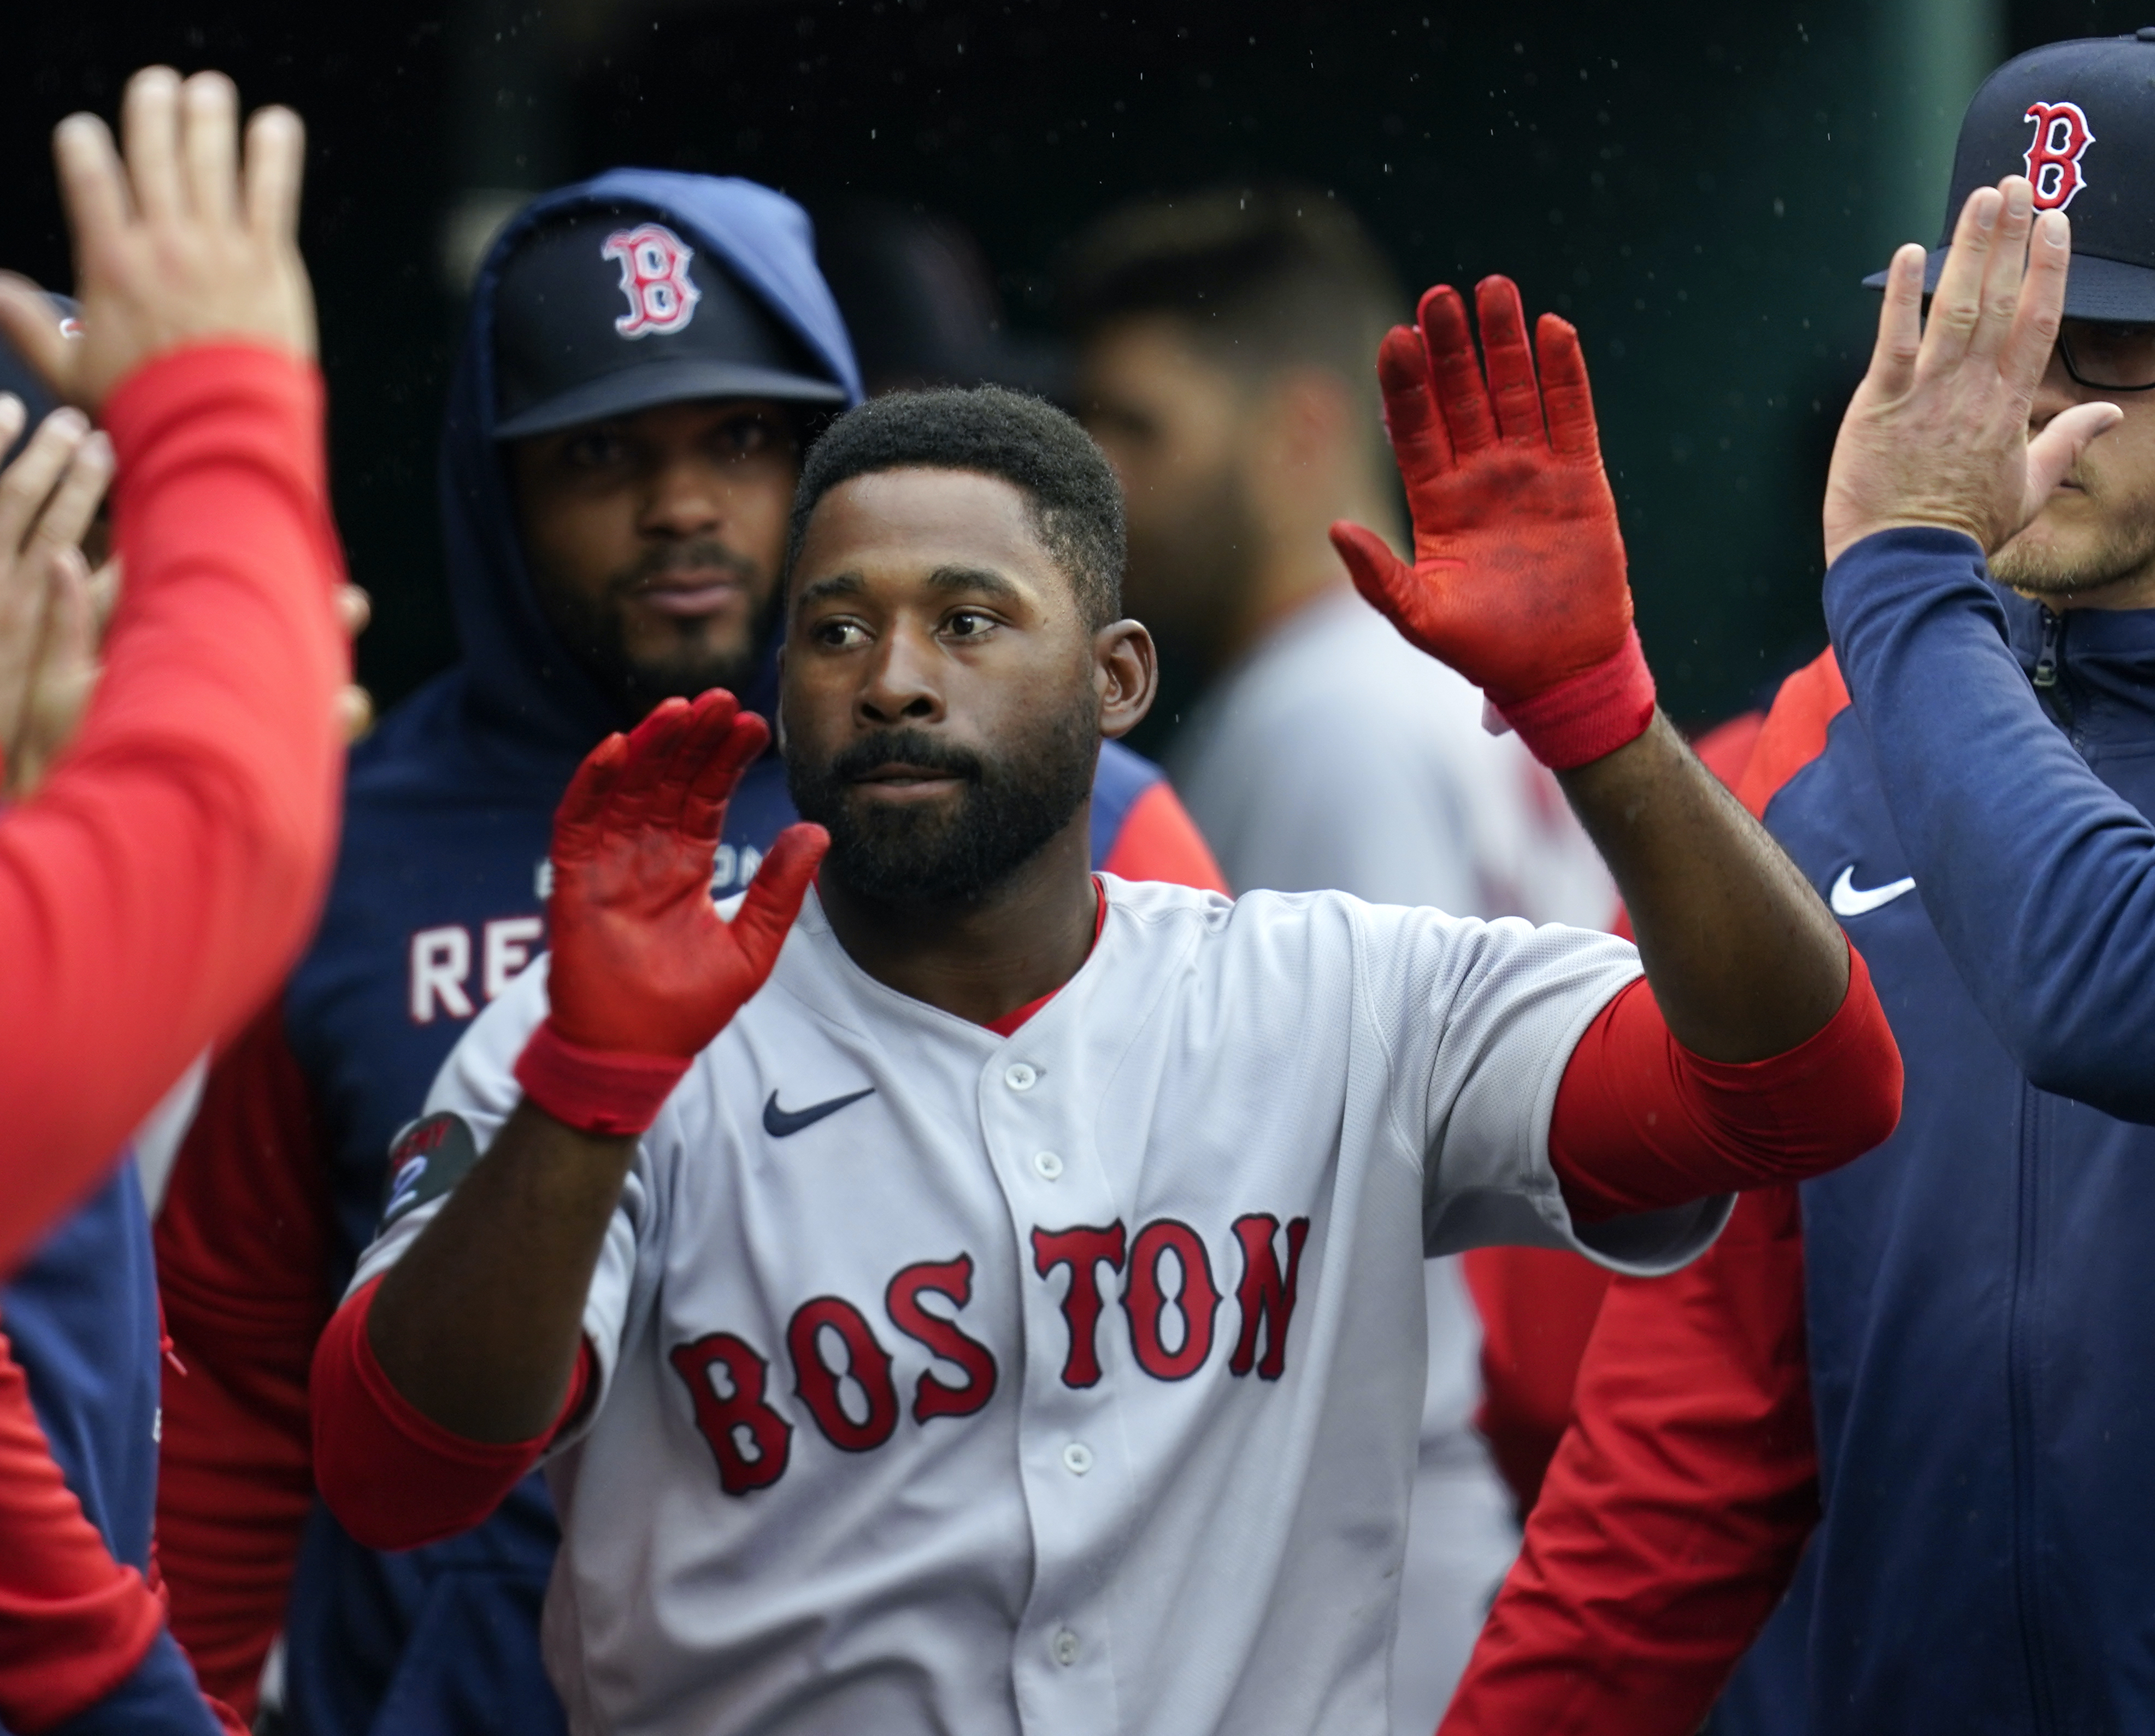 Blue Jays sign OF Jackie Bradley Jr. to 1-year deal - NBC Sports